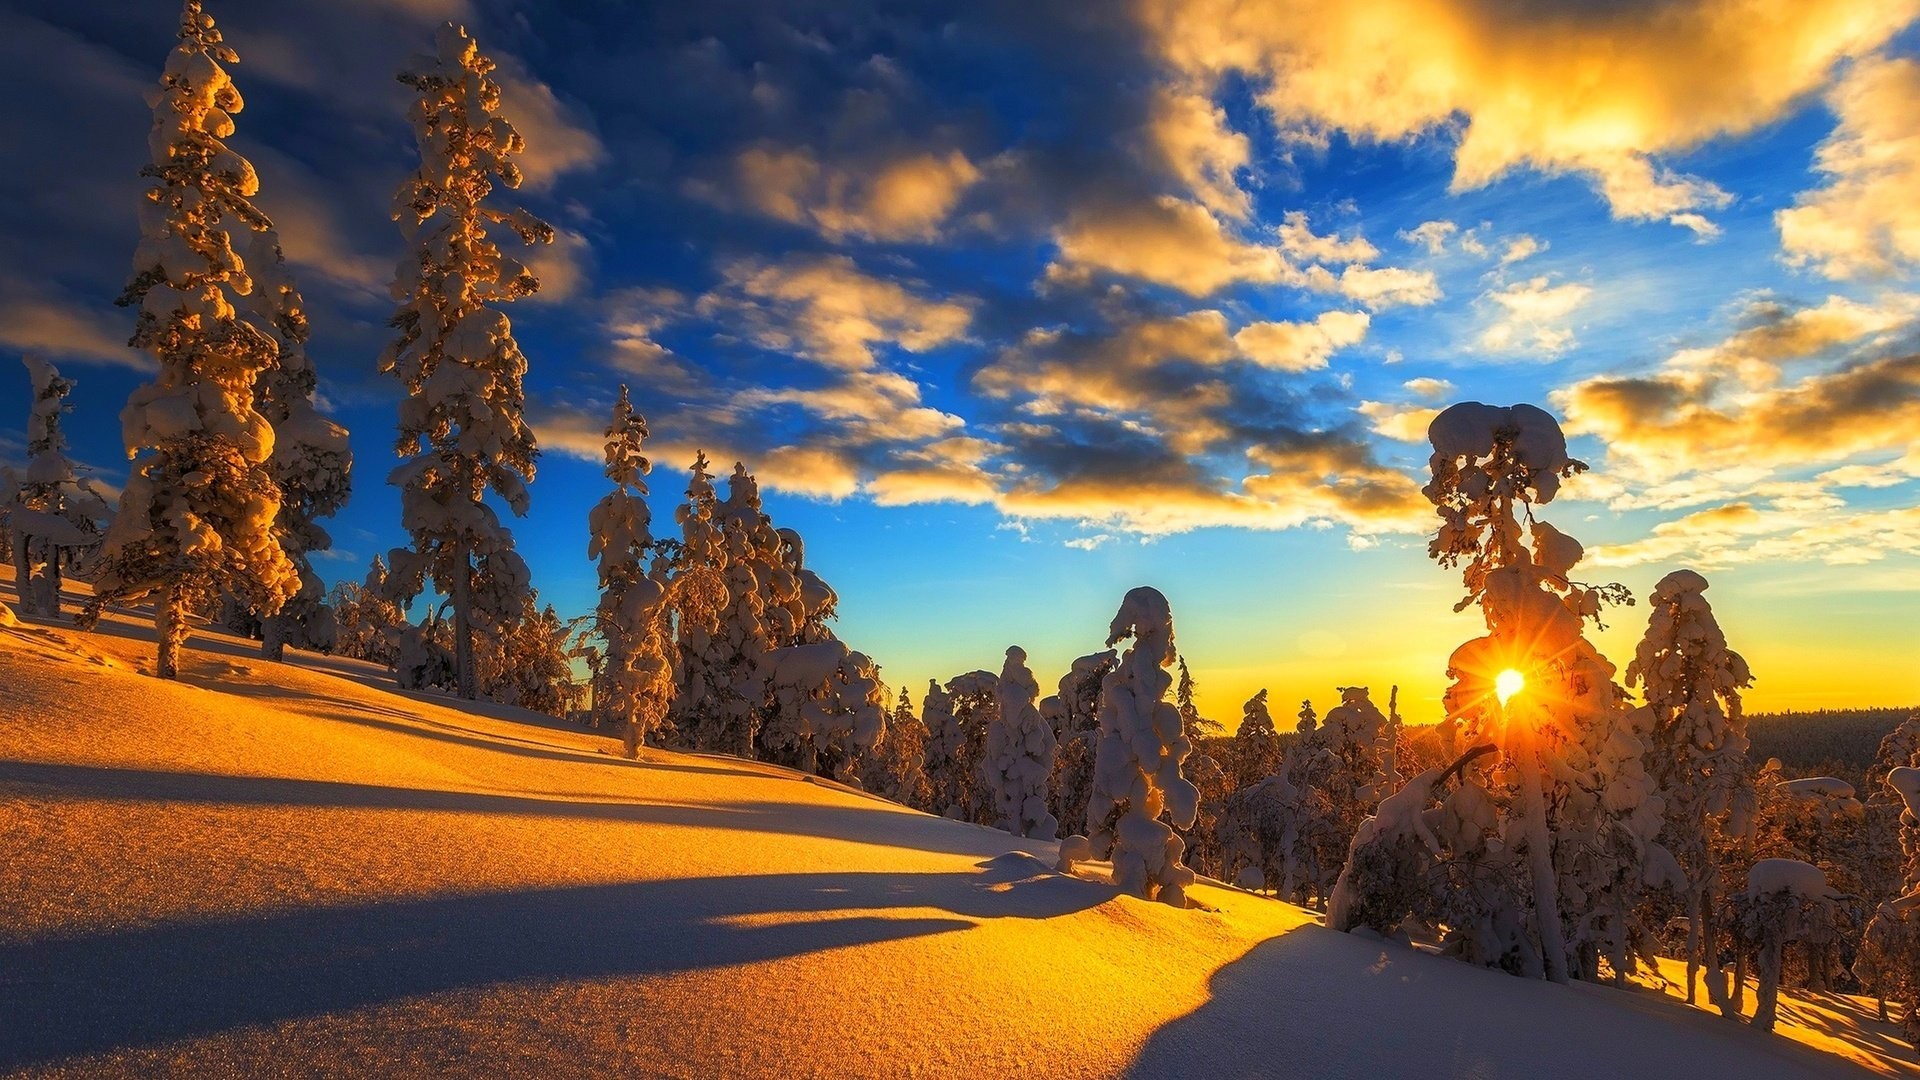 1920x1080 Landscapes - Landscape Winter Tree Snow Light Nature Beauty Sunset Hd  Wallpapers For Mobile Phones for